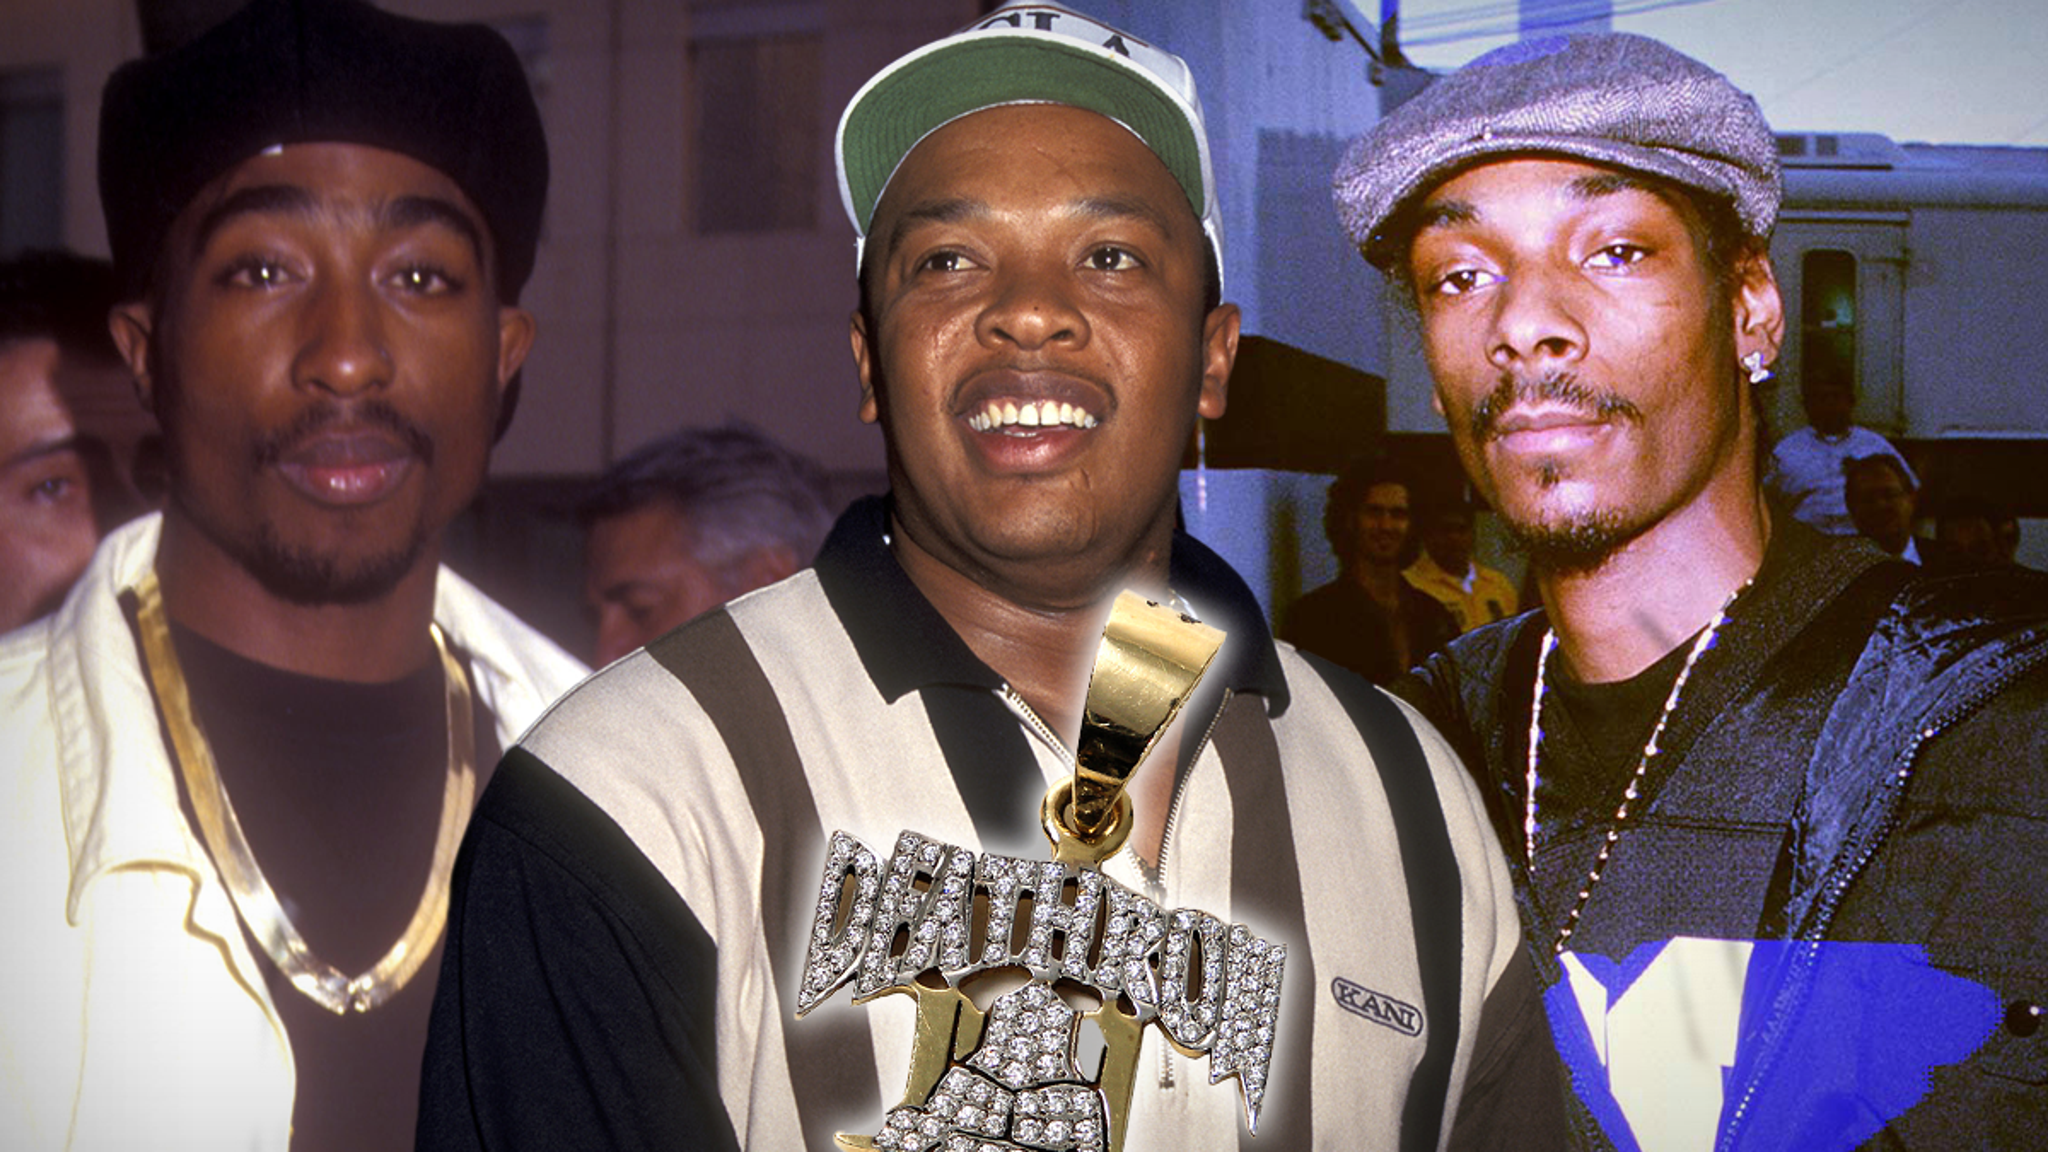 Snoop Dogg, Tupac’s Death Row Pendants Expected to Auction for $1 Million